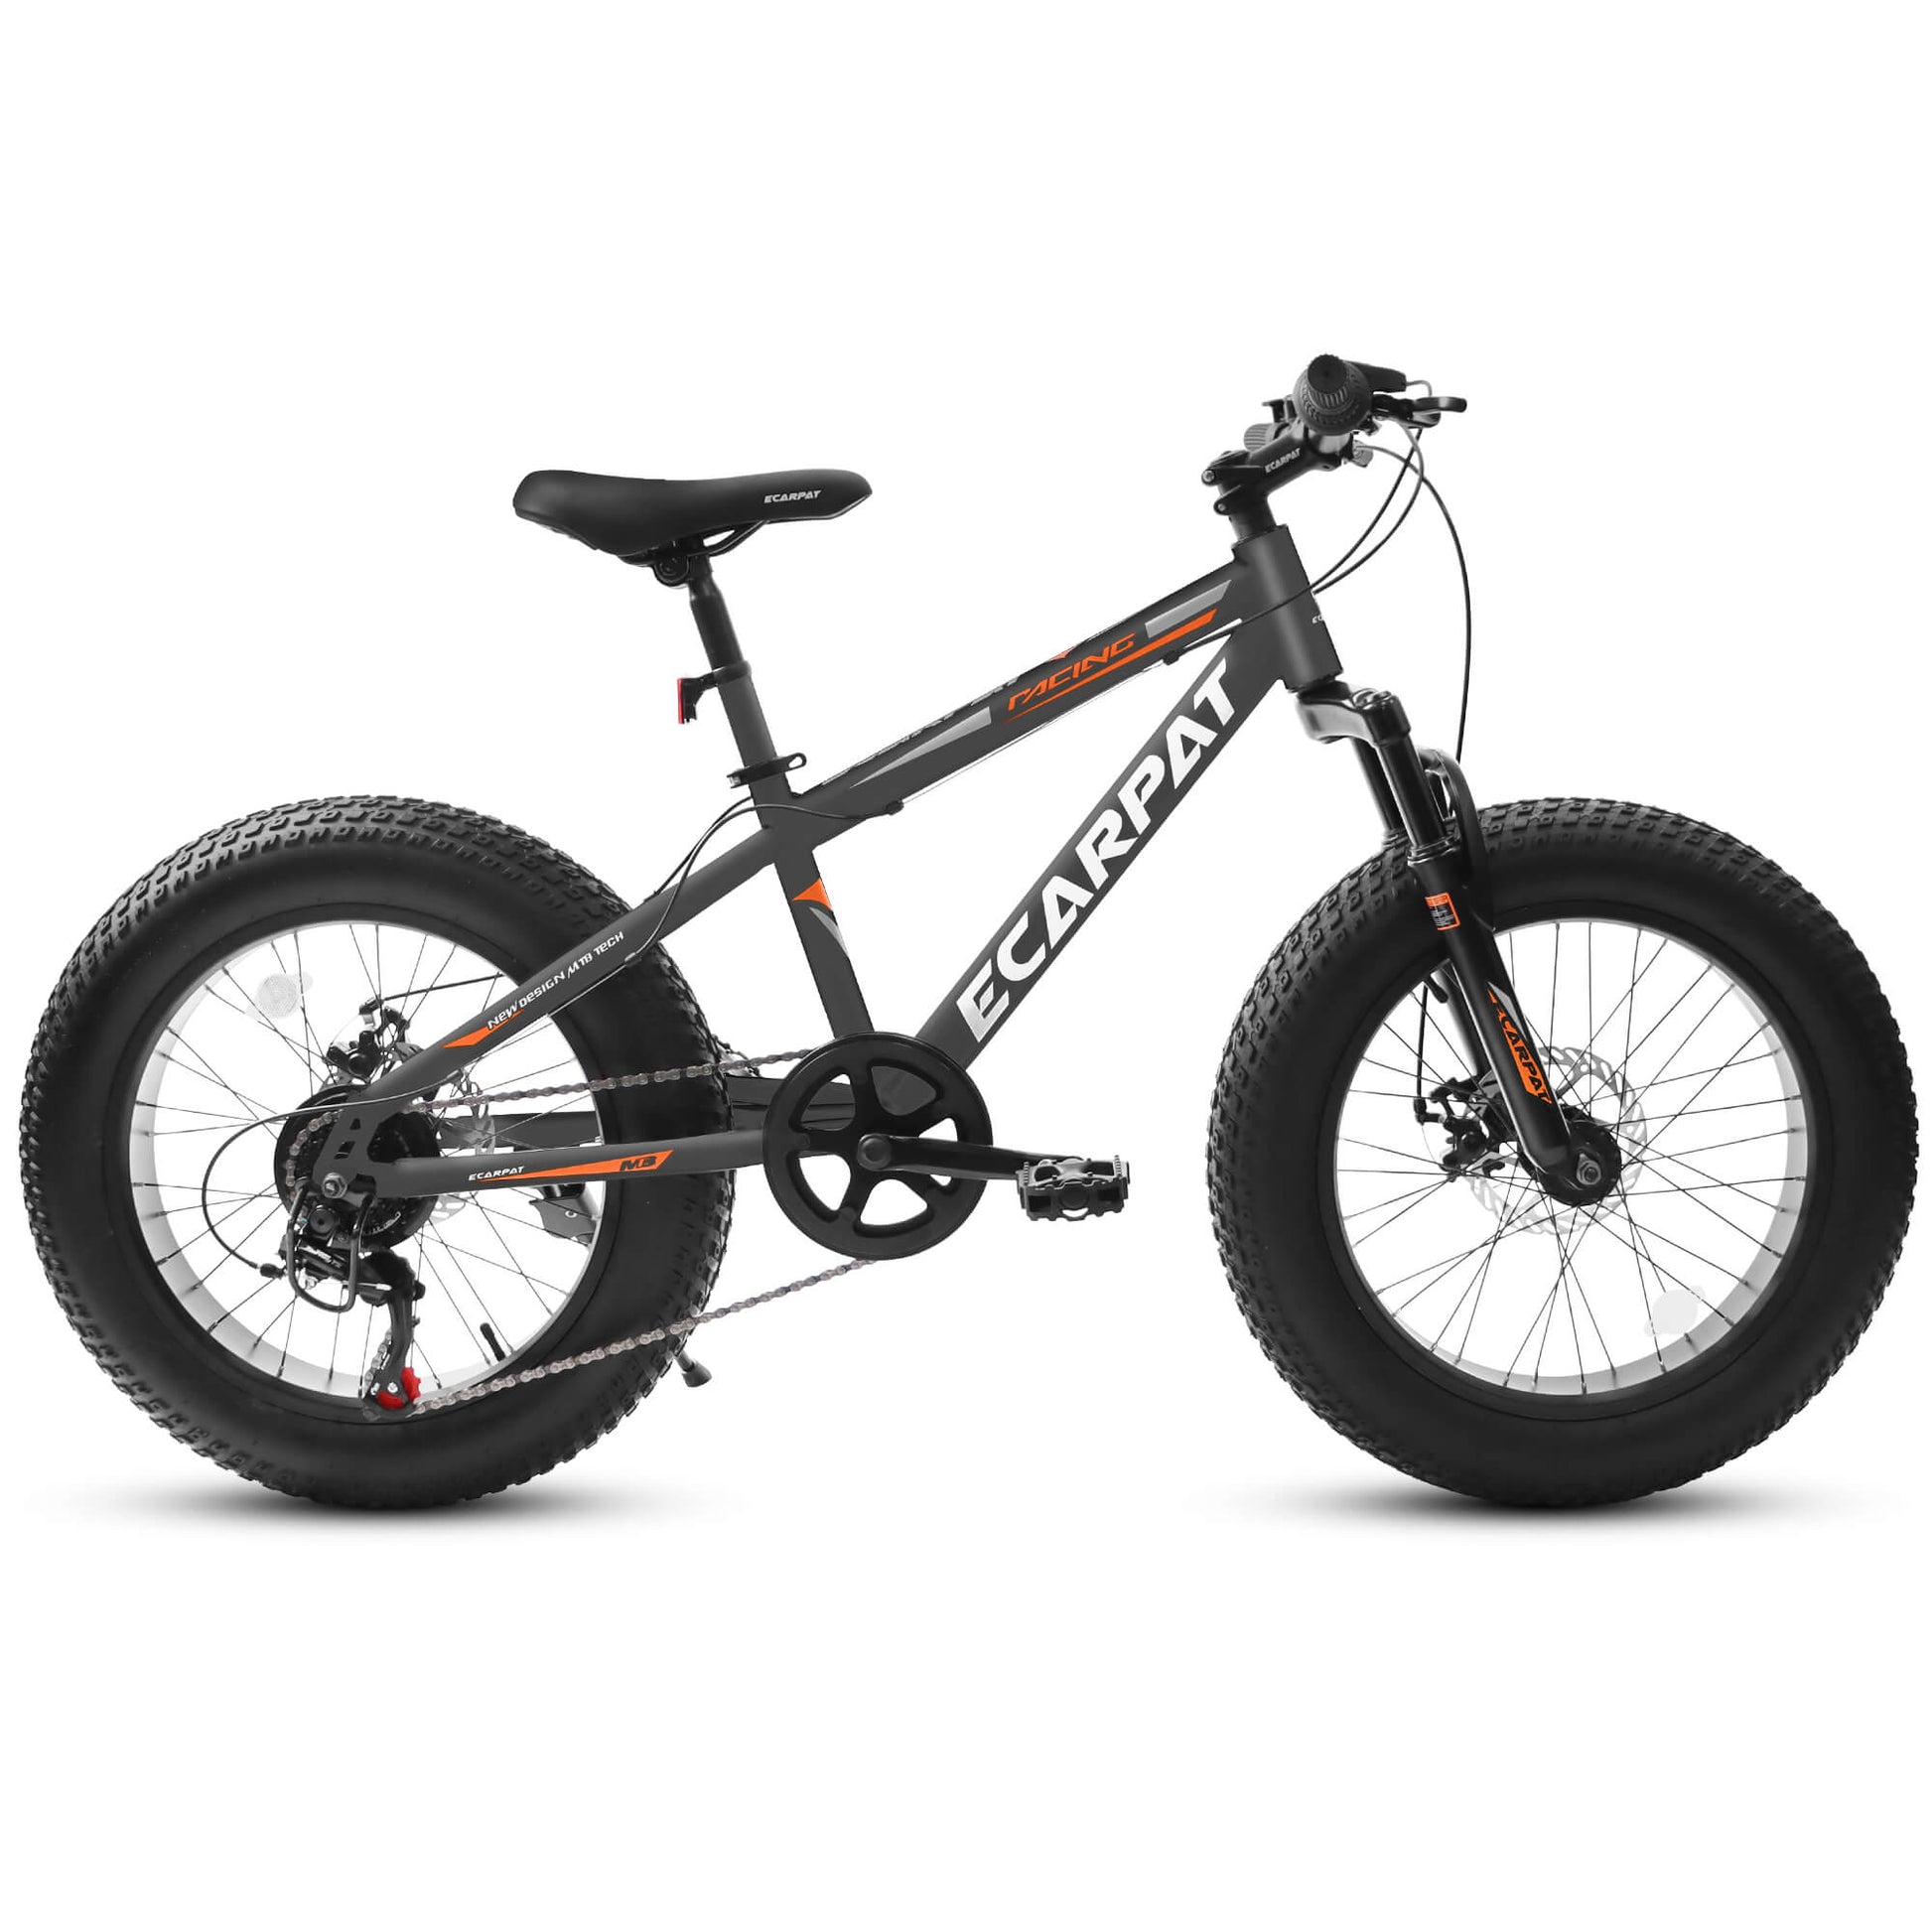 Ecarpat 20"×4.0" carbon steel fat tire bike crafted with a rugged carbon steel frame